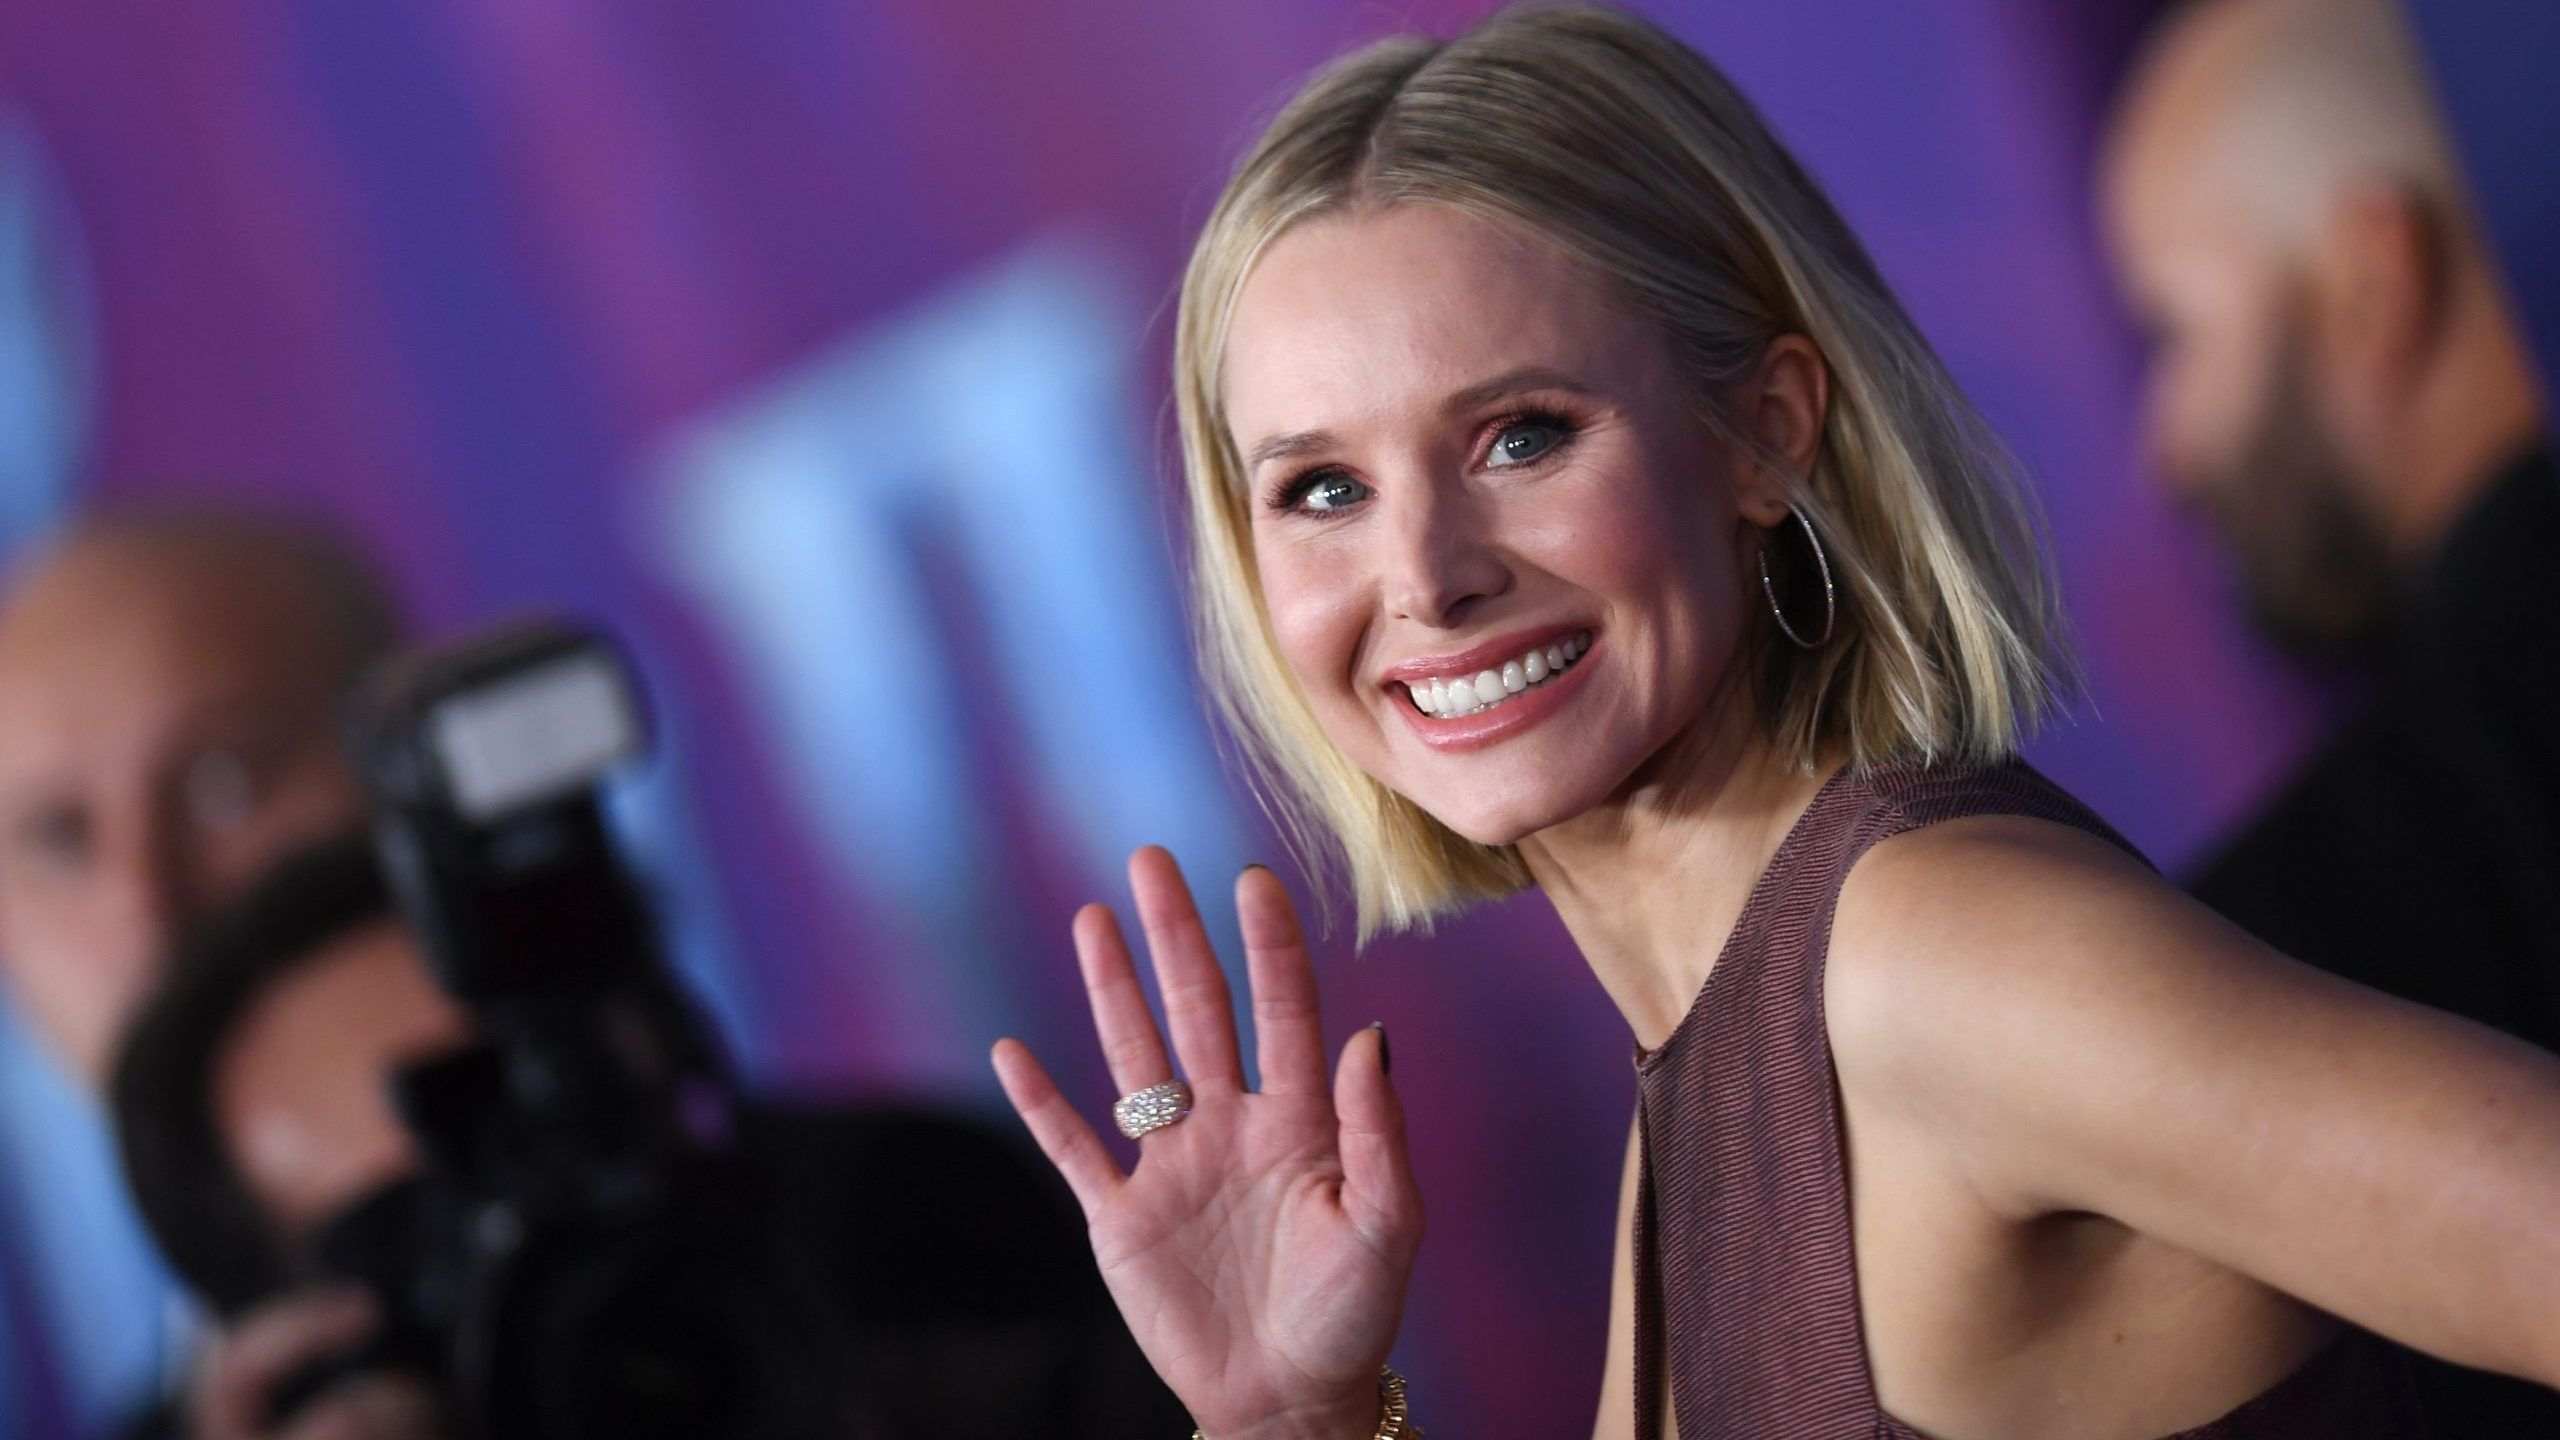 "You’re supposed to start getting colonoscopies, I think, at 45, and 40 if you have any family history," says Kristen Bell. TOPSHOT - US actress Kristen Bell arrives for Disney's World Premiere of "Frozen 2" at the Dolby theatre in Hollywood on November 7, 2019. (Photo by VALERIE MACON / AFP) (Photo by VALERIE MACON/AFP via Getty Images)